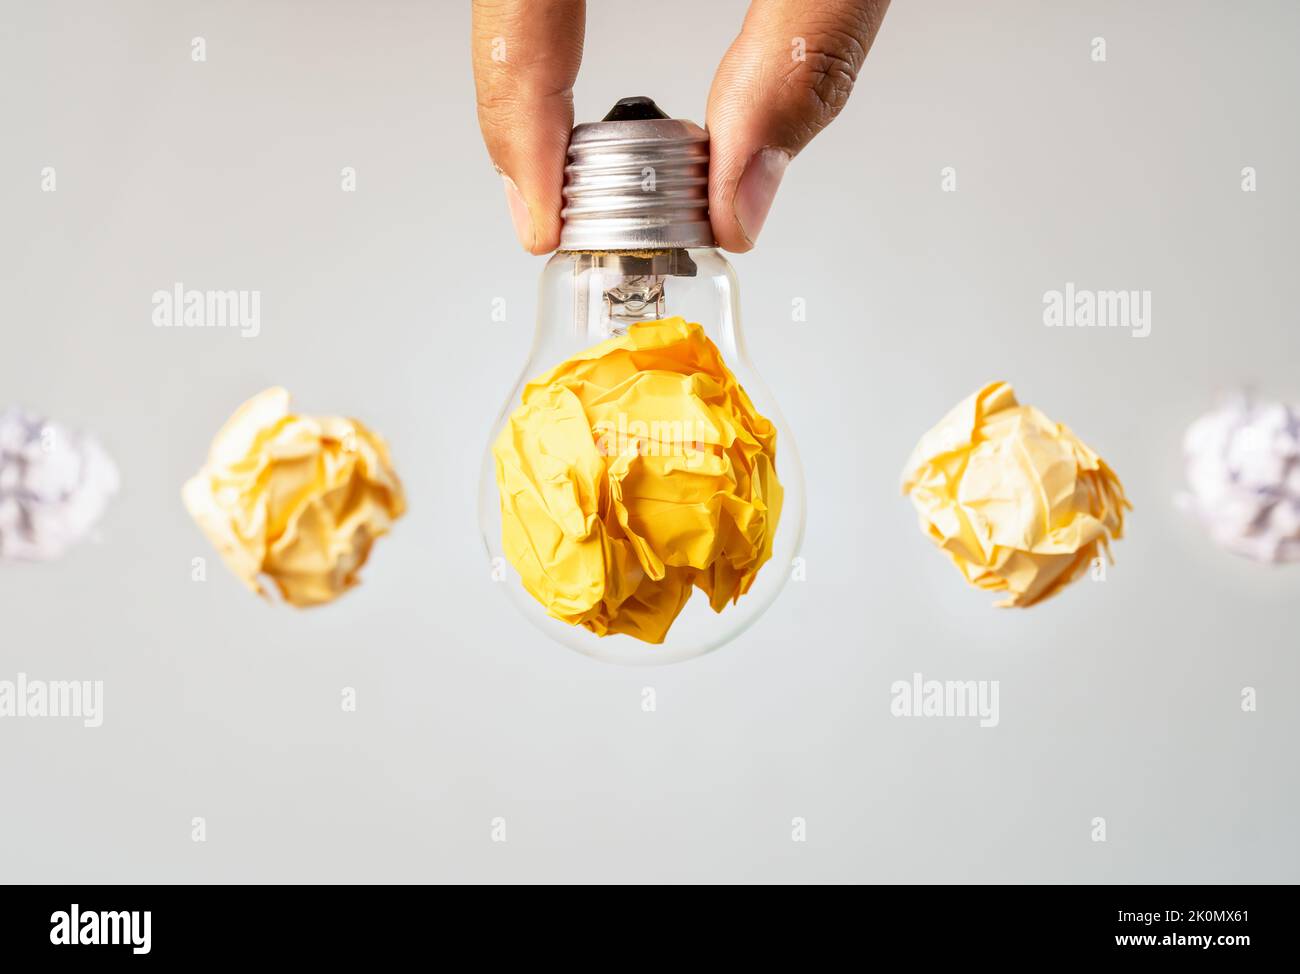 Close up photo of crumbled colorful paper and light bulb in the same frame as a symbol of persistance, perseverance and hardwork. Stock Photo